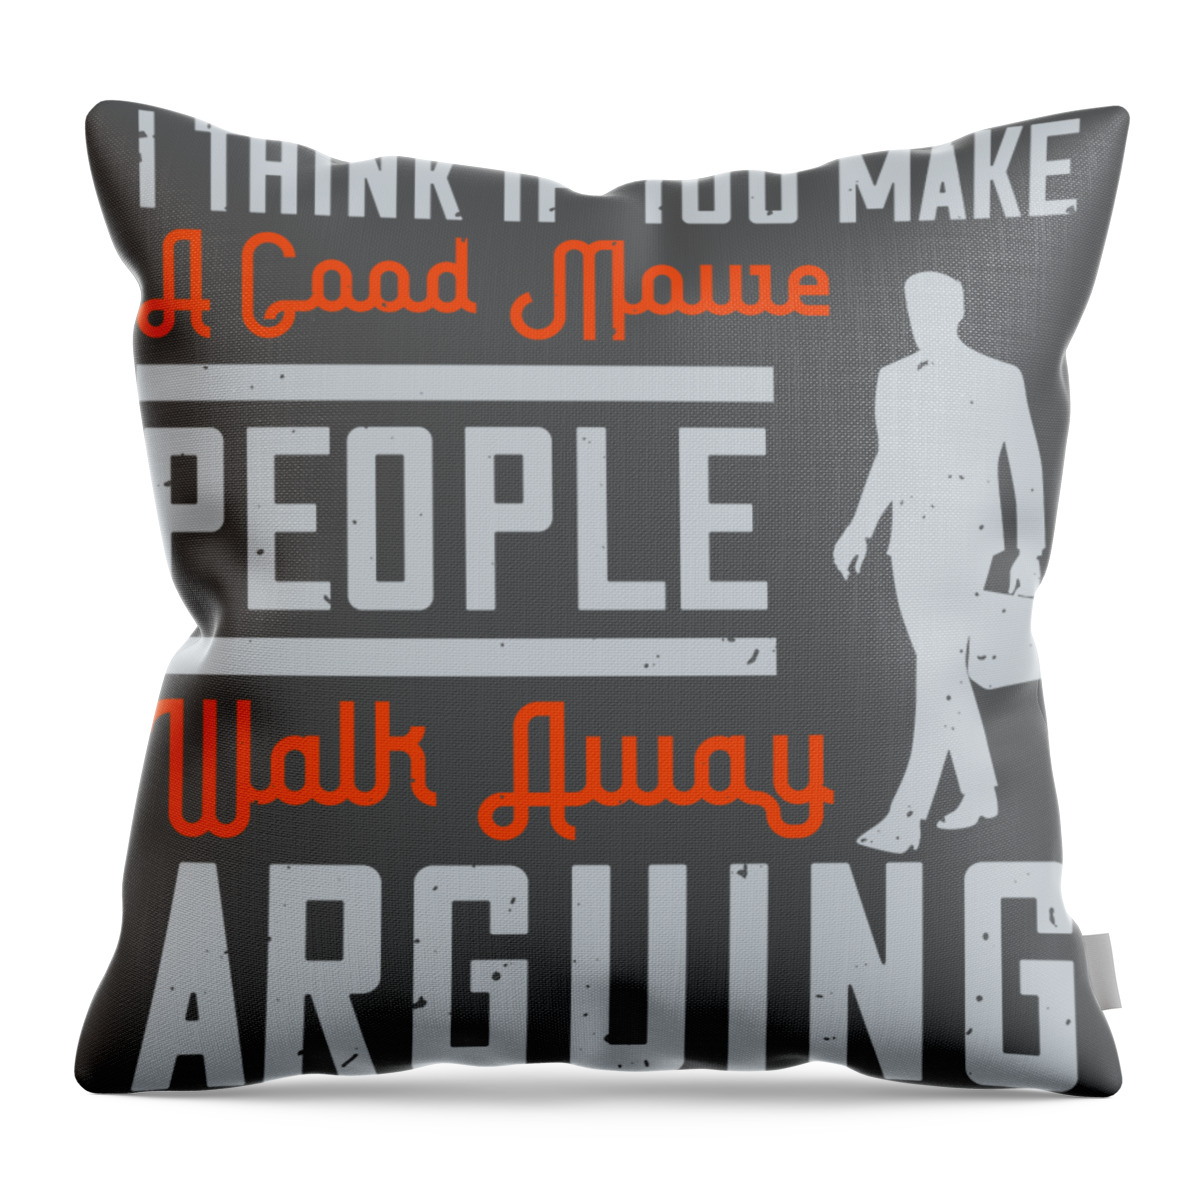 Walking Throw Pillow featuring the digital art Walking Gift I Think If You Make A Good Movie People Walk Away Arguing by Jeff Creation